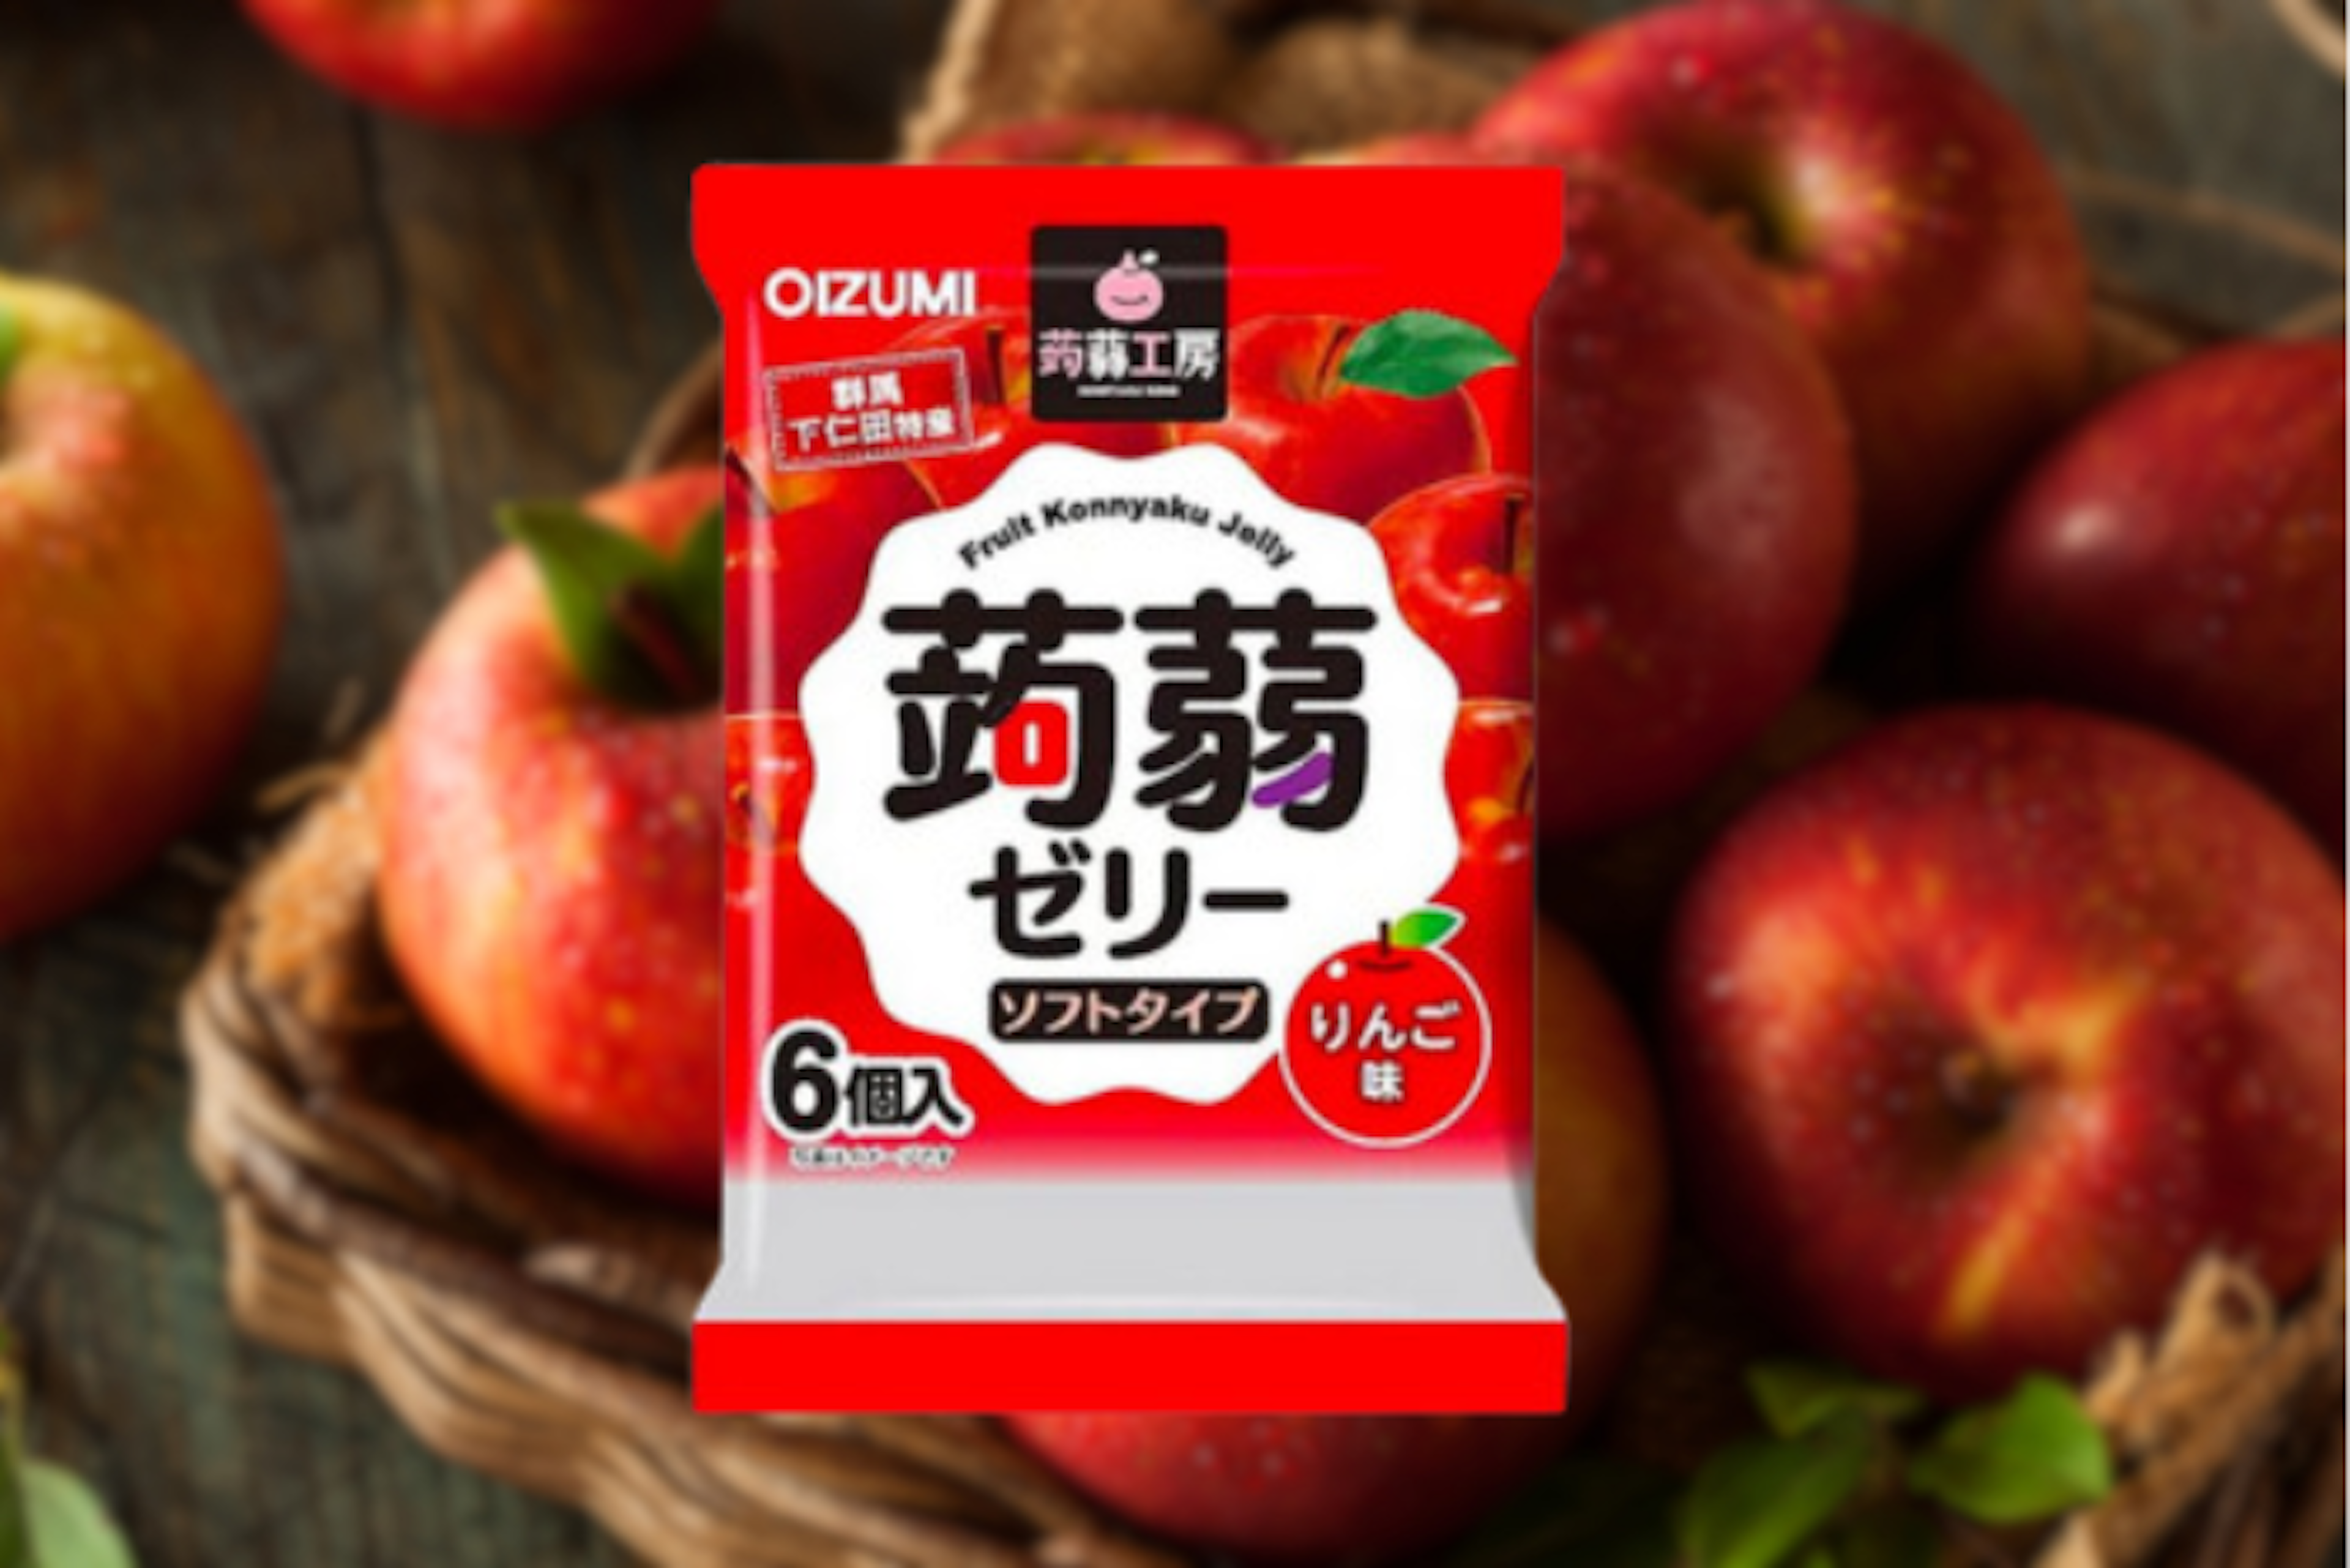 OIZUMI Konjac Jelly Apple 106g - Low calorie and healthy snack